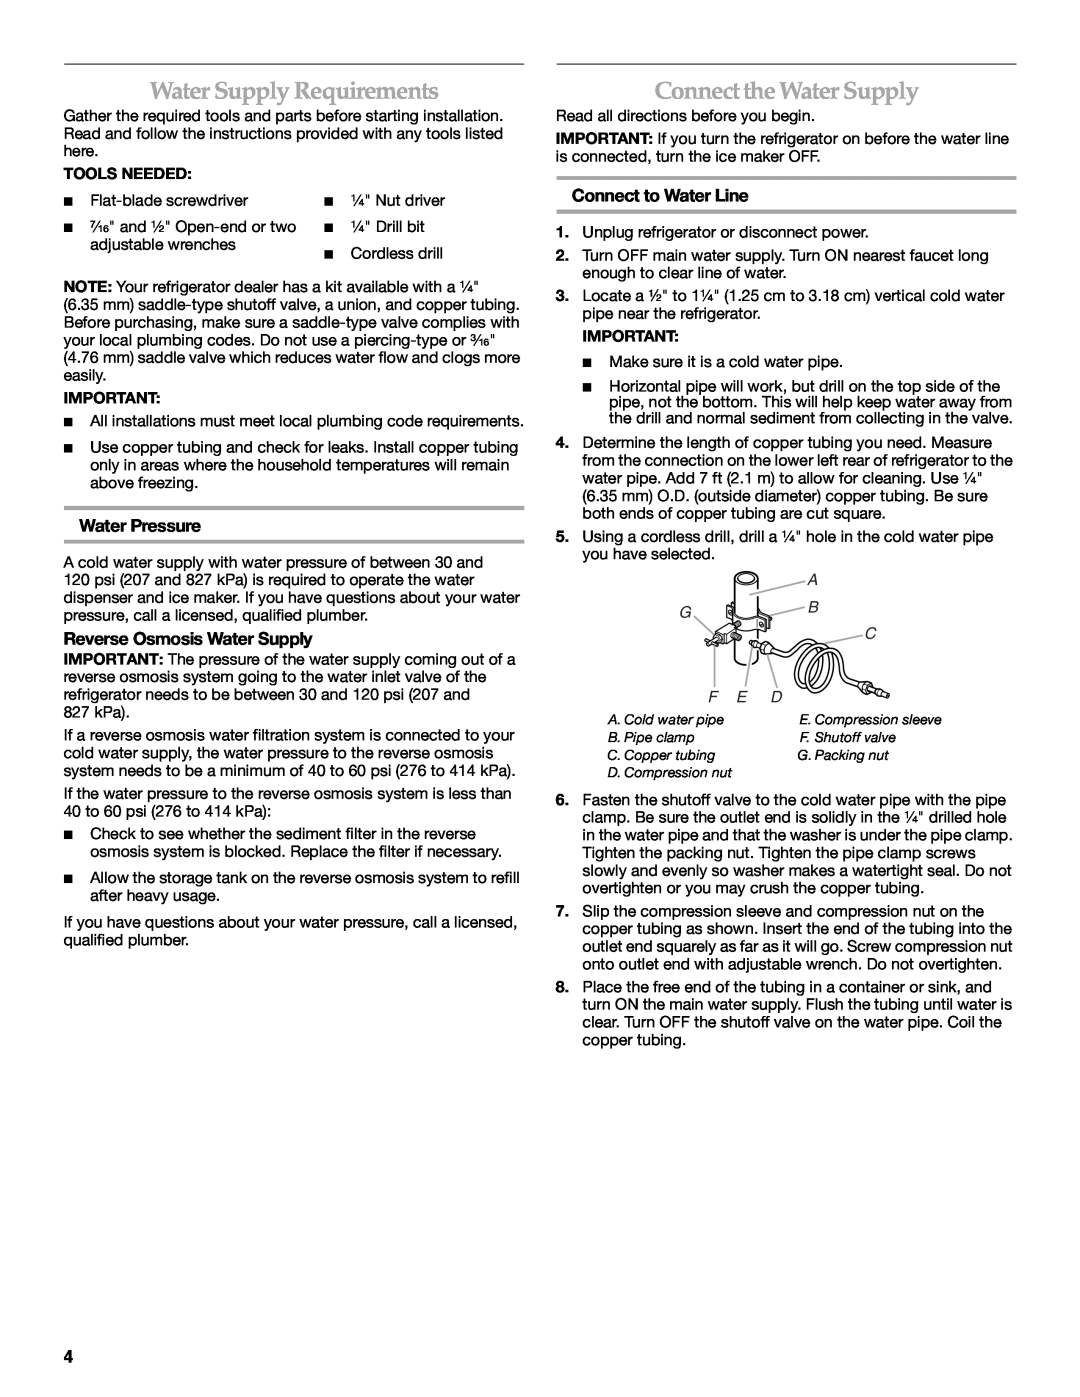 Maytag W10249206A Water Supply Requirements, Connect the Water Supply, Water Pressure, Reverse Osmosis Water Supply 